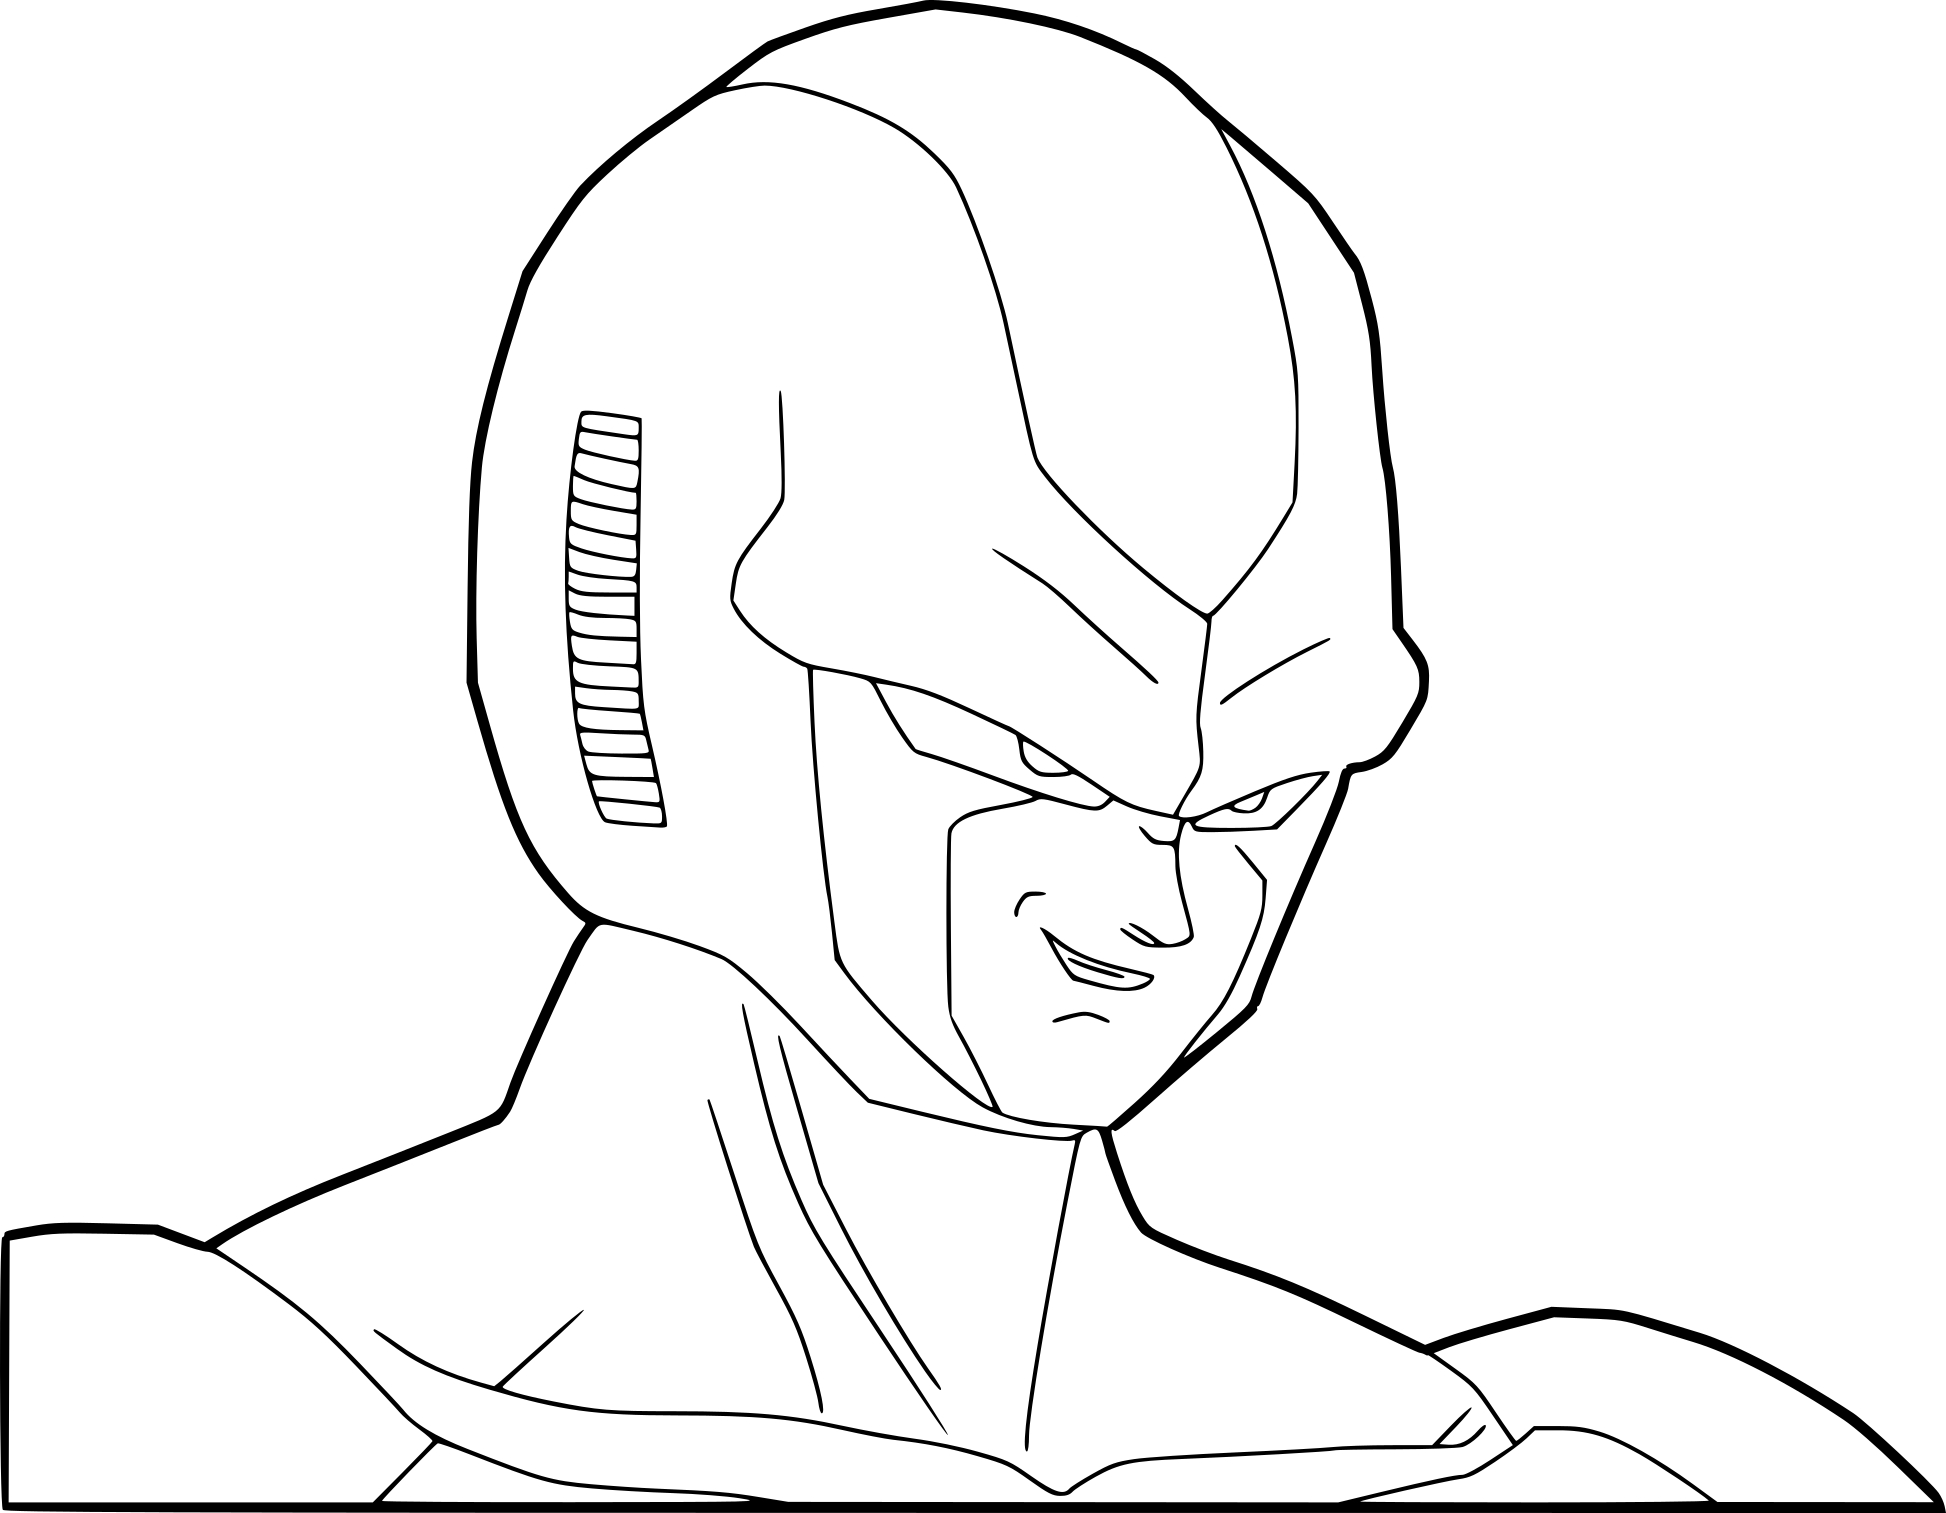 Cooler coloring page